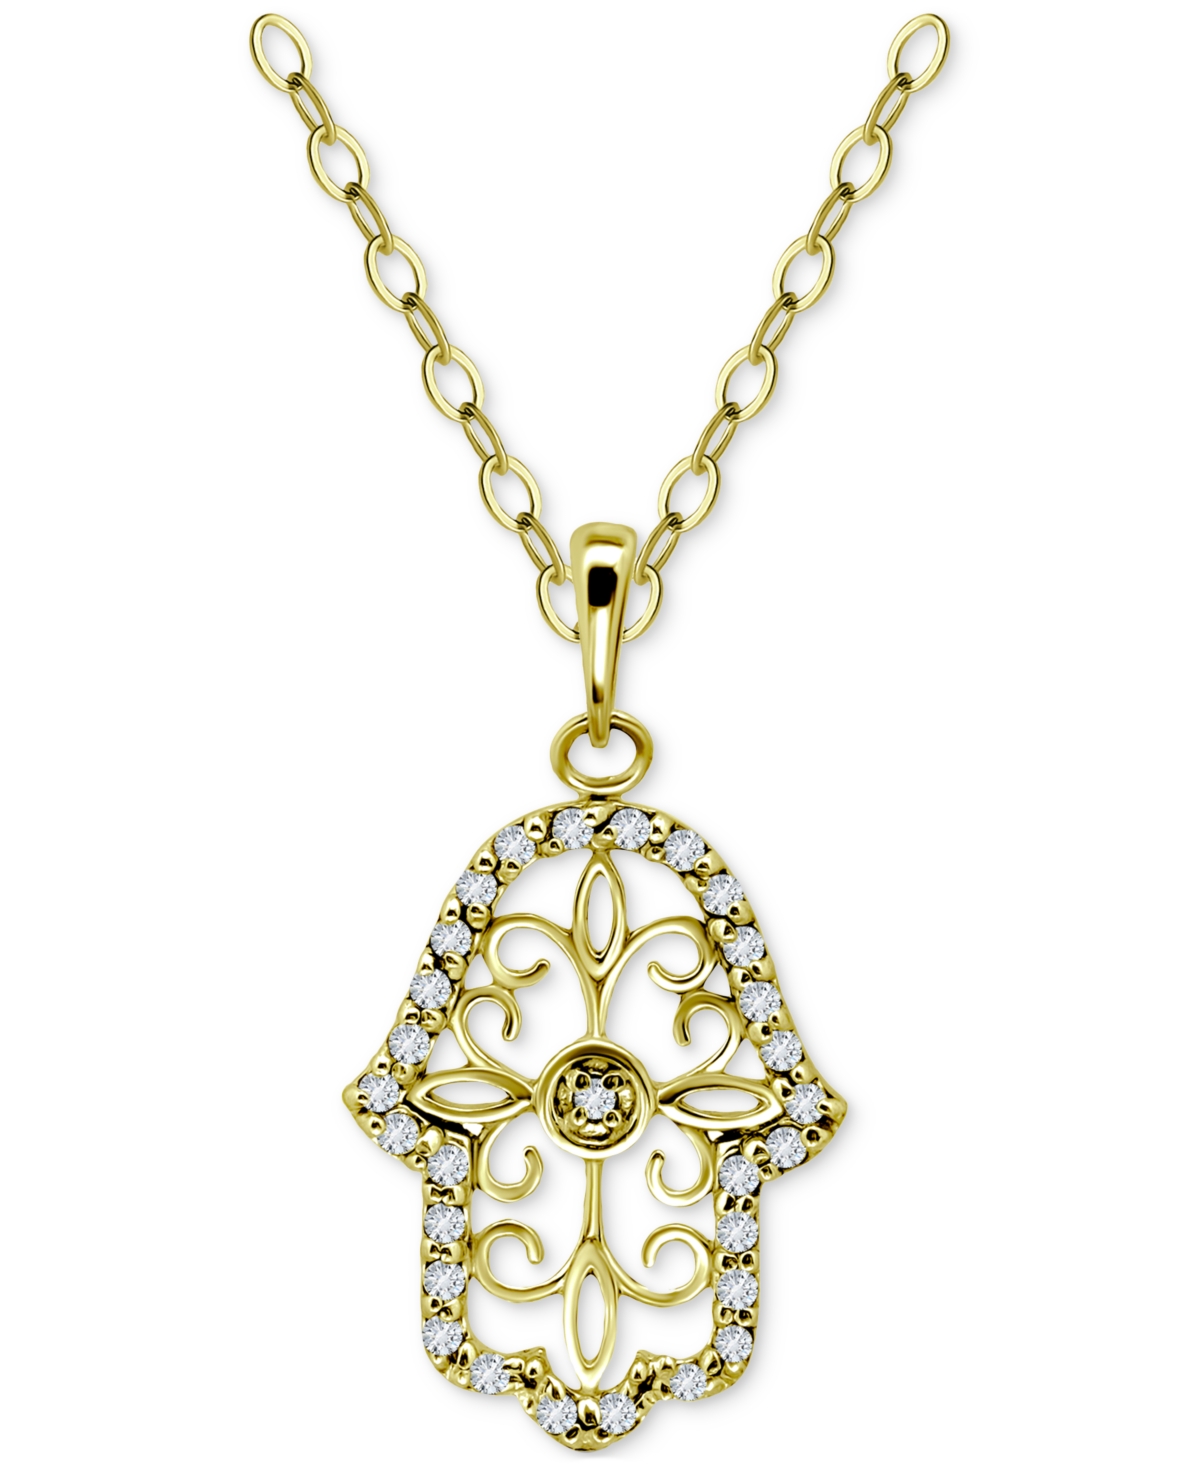 Giani Bernini Cubic Zirconia Hamsa Hand Openwork Pendant Necklace In 14k Gold-plated Sterling Silver, 16" + 2" Ext